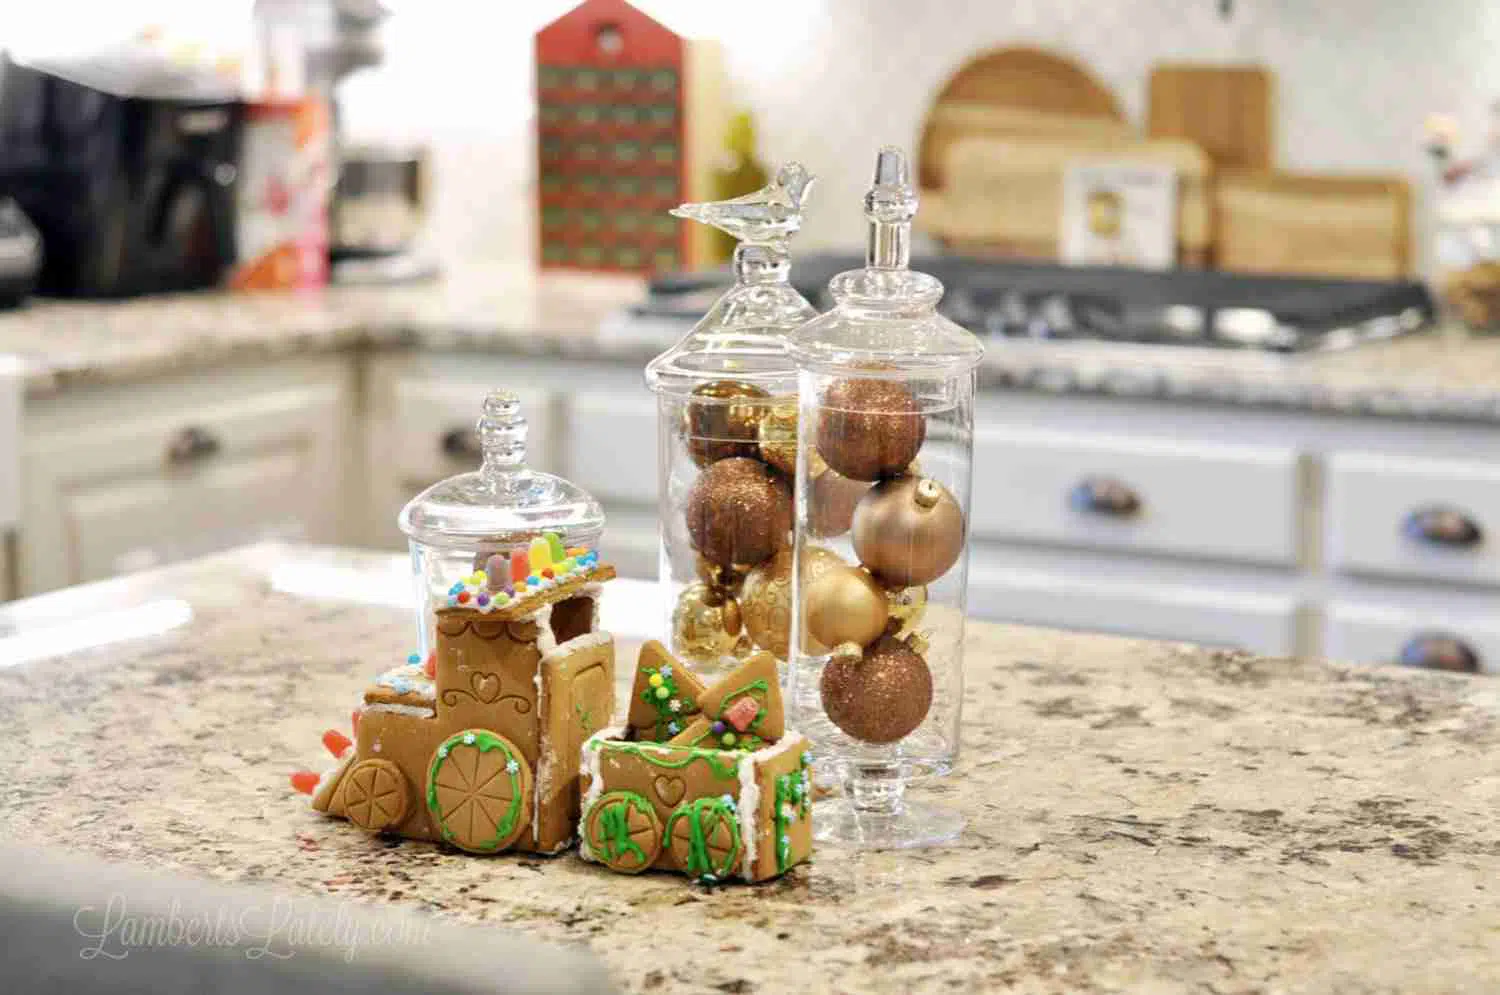 ornaments in glass jars, gingerbread train on a kitchen counter.